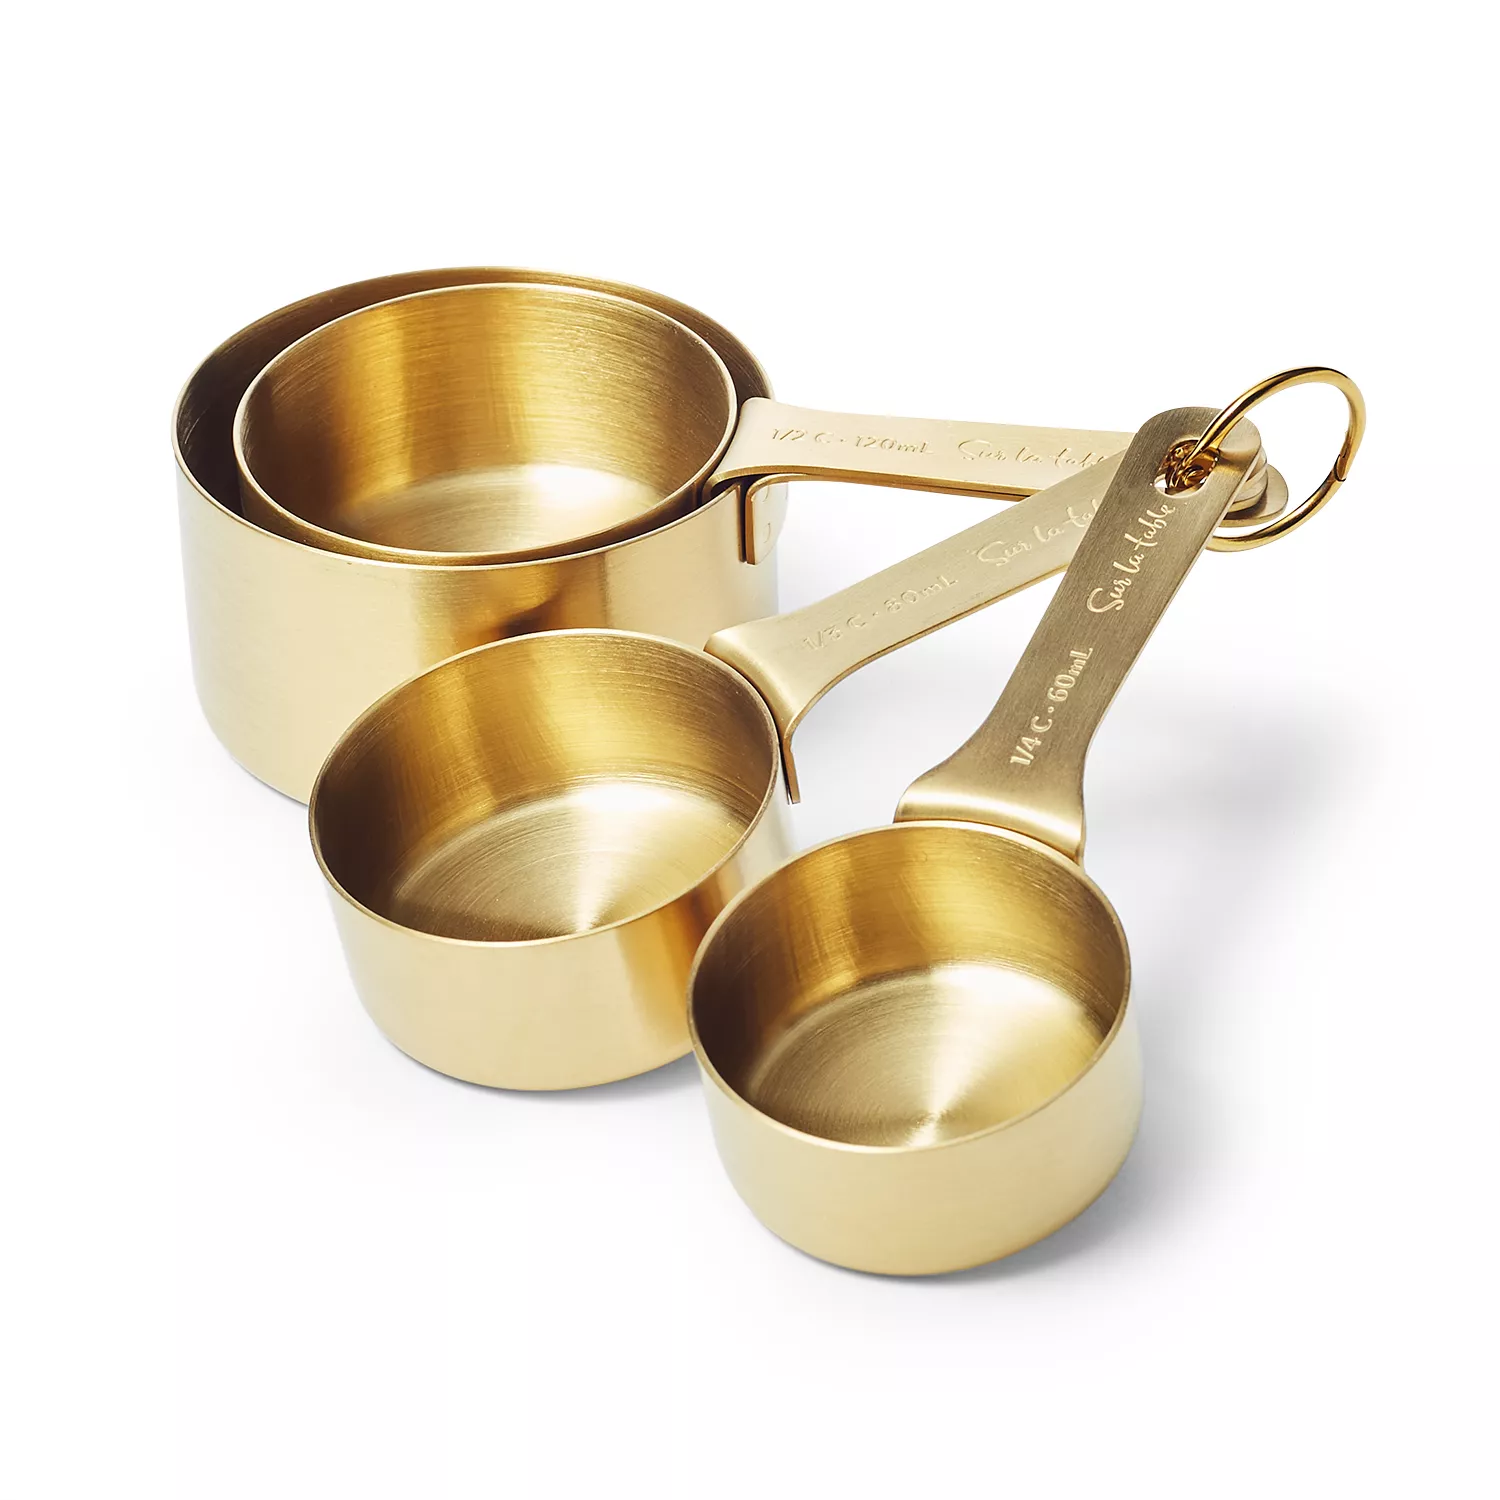 Sur La Table Stainless Steel Measuring Cups, Set of 6